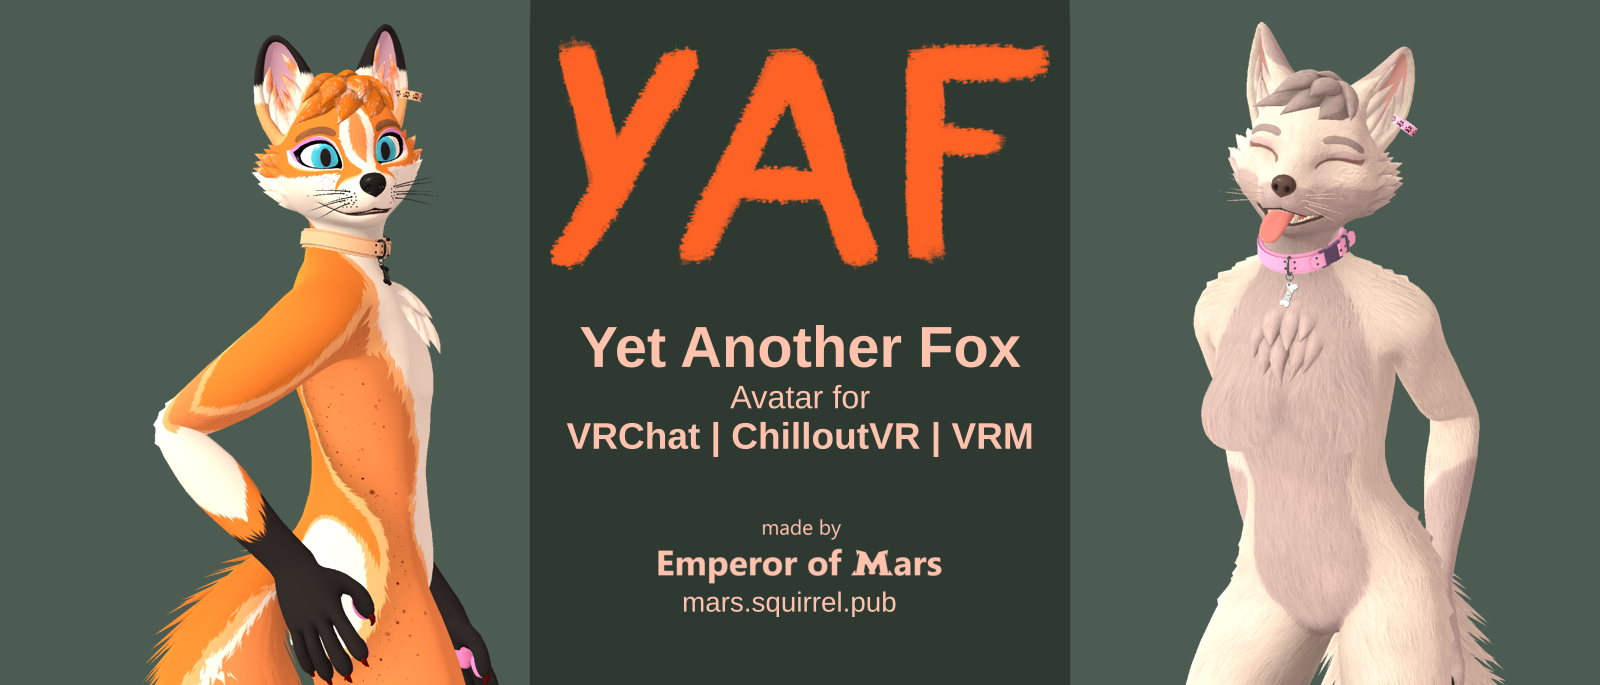 YAF - Yet Another Fox (VRChat, ChilloutVR, VRM)